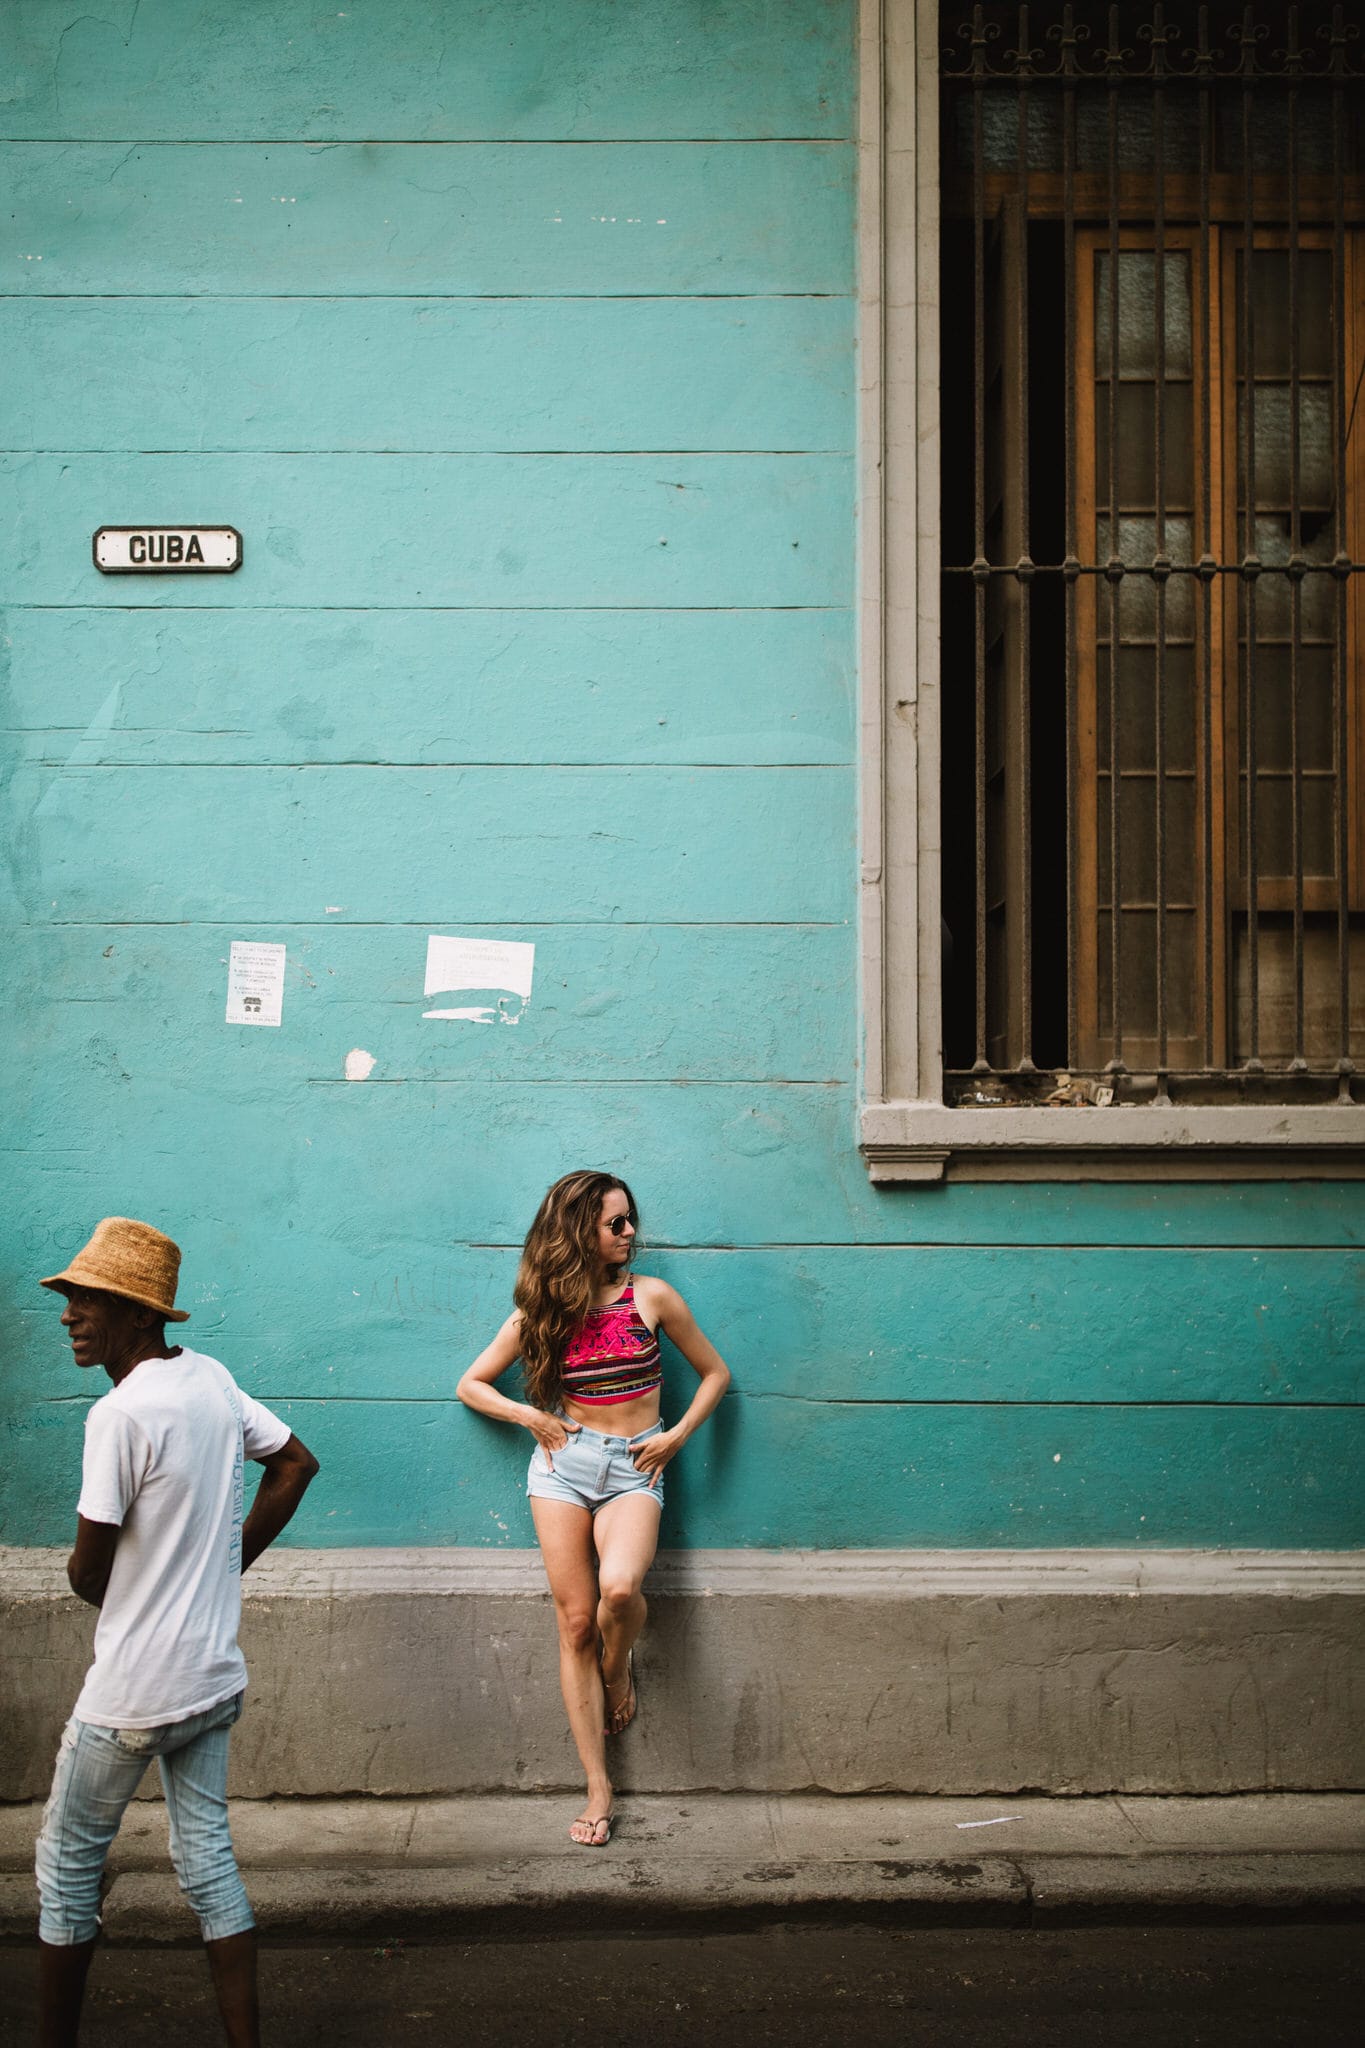 Street photography and vibrant colours in Centro Havana. Travel photographer Brent Calis.